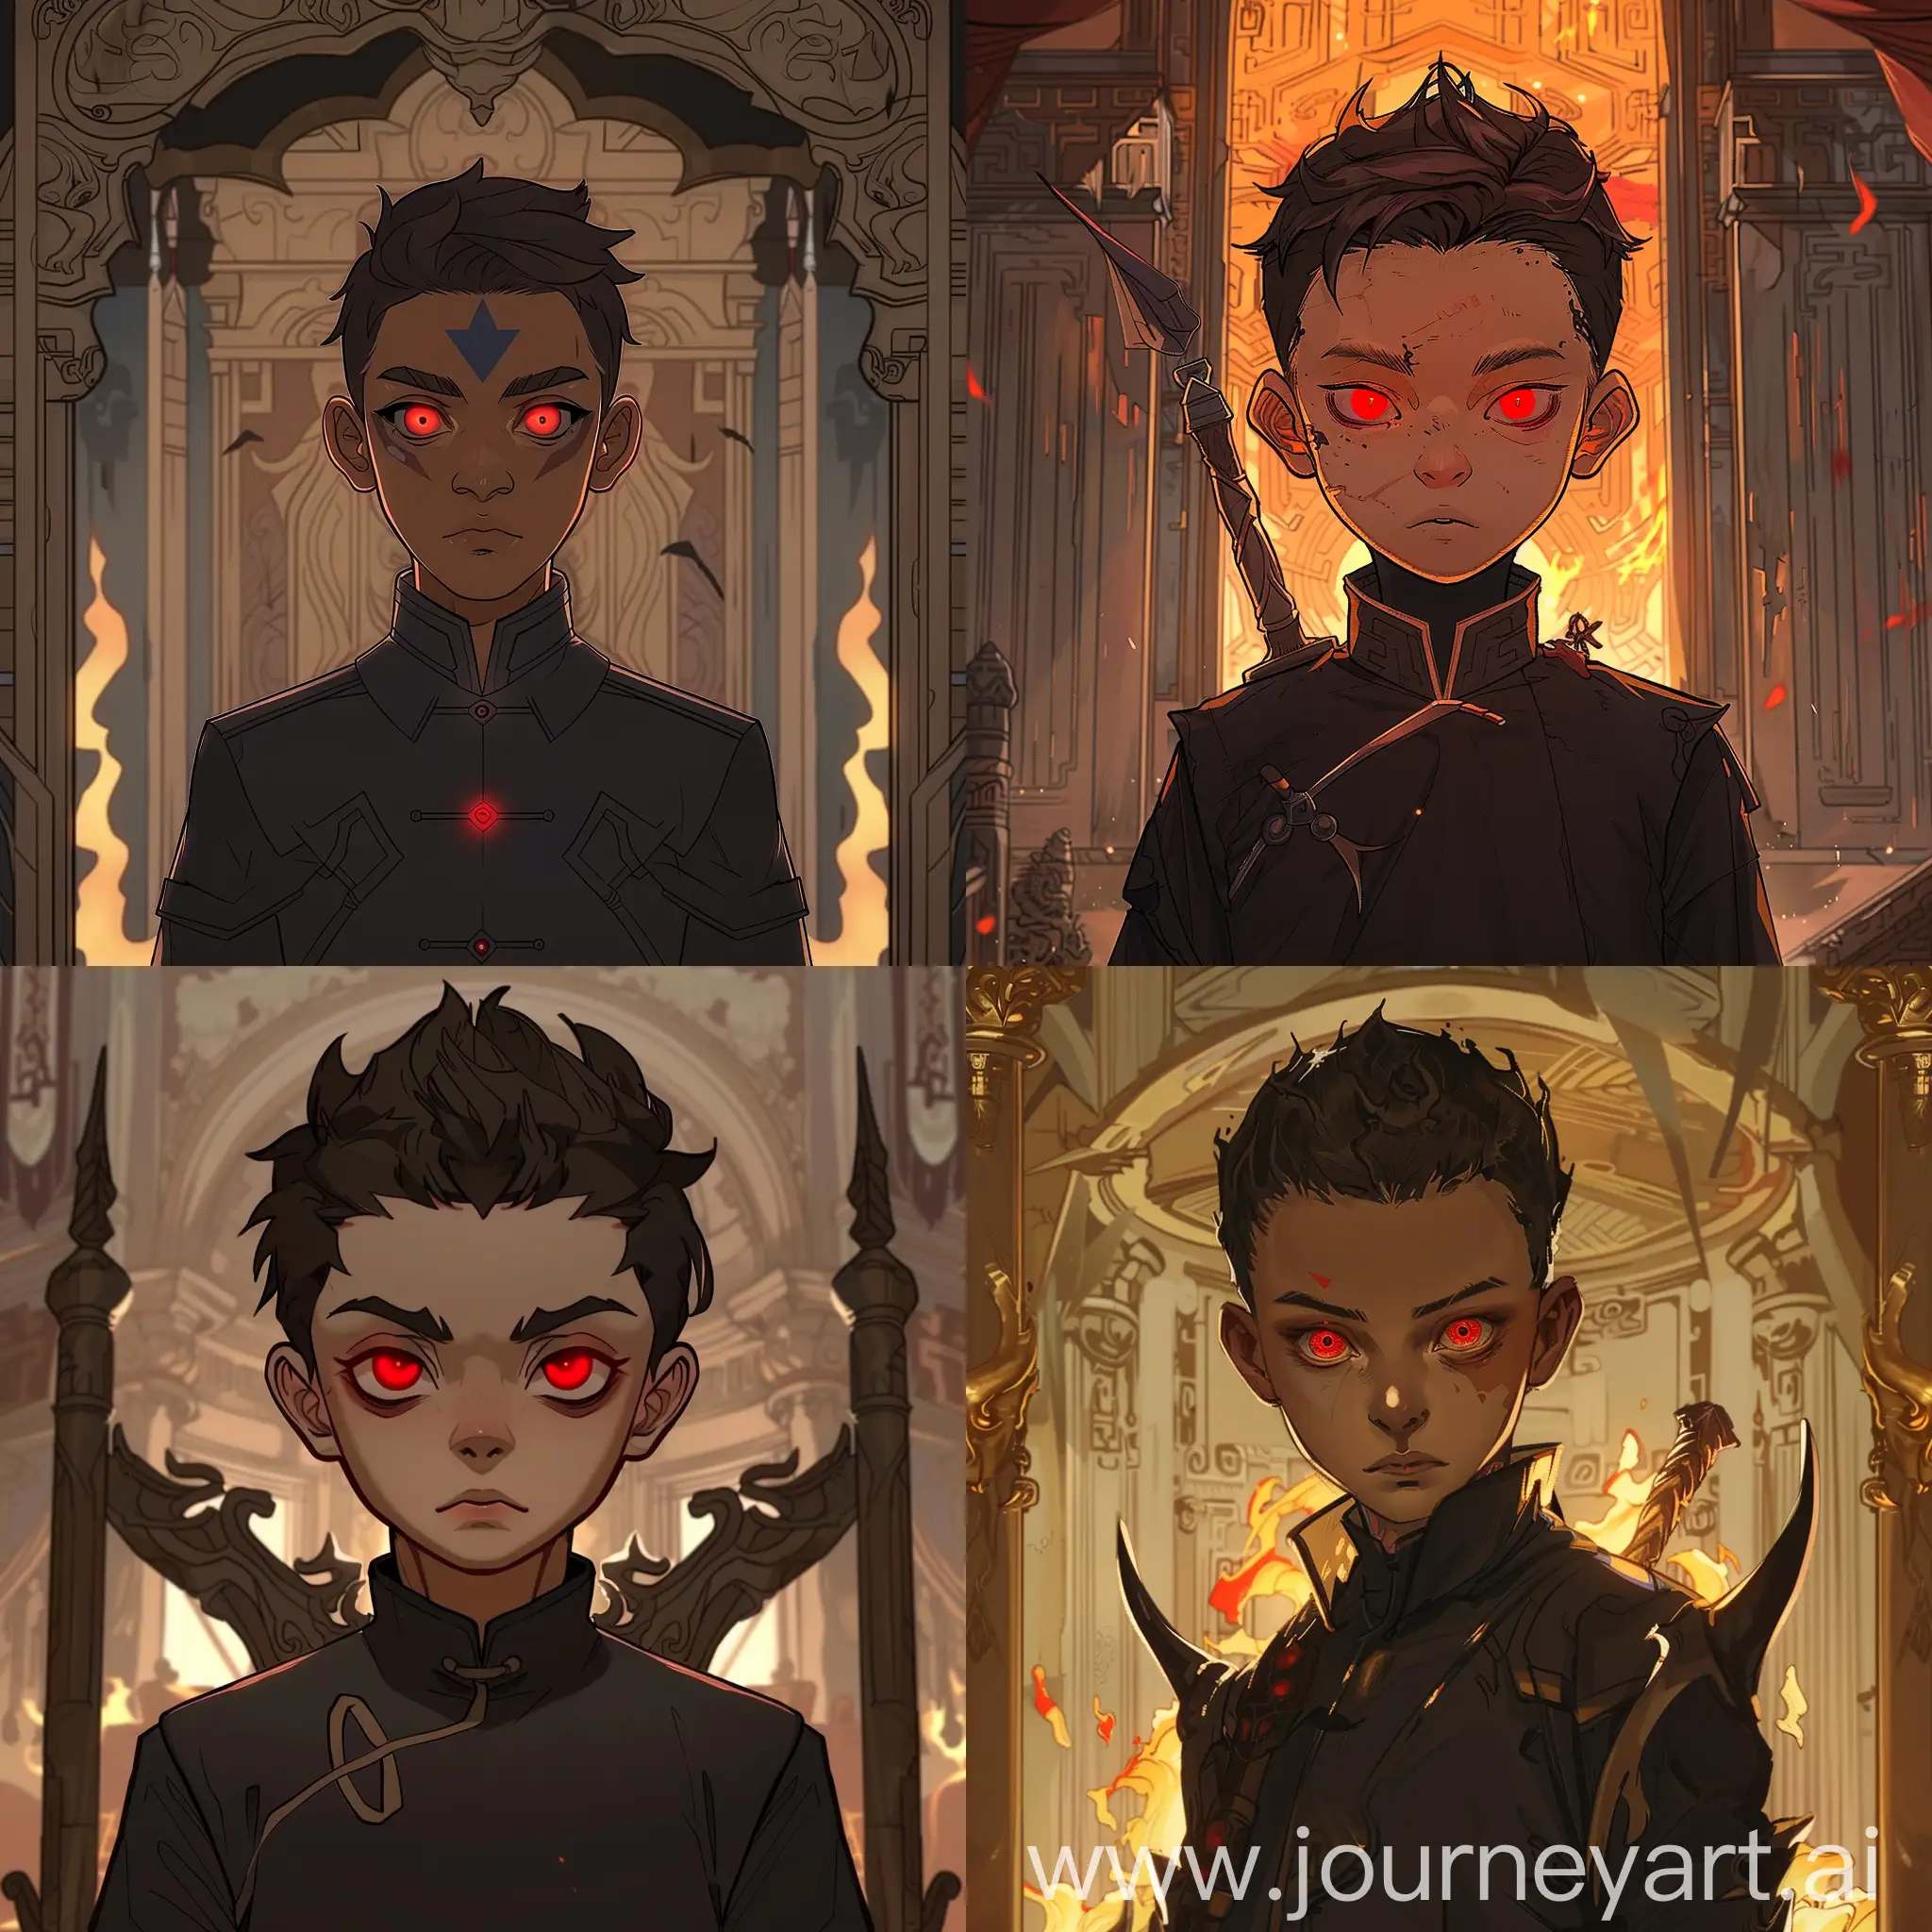 Kai Wu is a 14 year old boy standing at 5’8 with red eyes and medium black hair reaching down to his neck. He has light caramel skin and usually wears a black common outfit with a dagger at his side.  Currently, he is being exiled by Fire Lord Ozai in his throne room. Wide Frame. Avatar The Last Airbender art style. 
